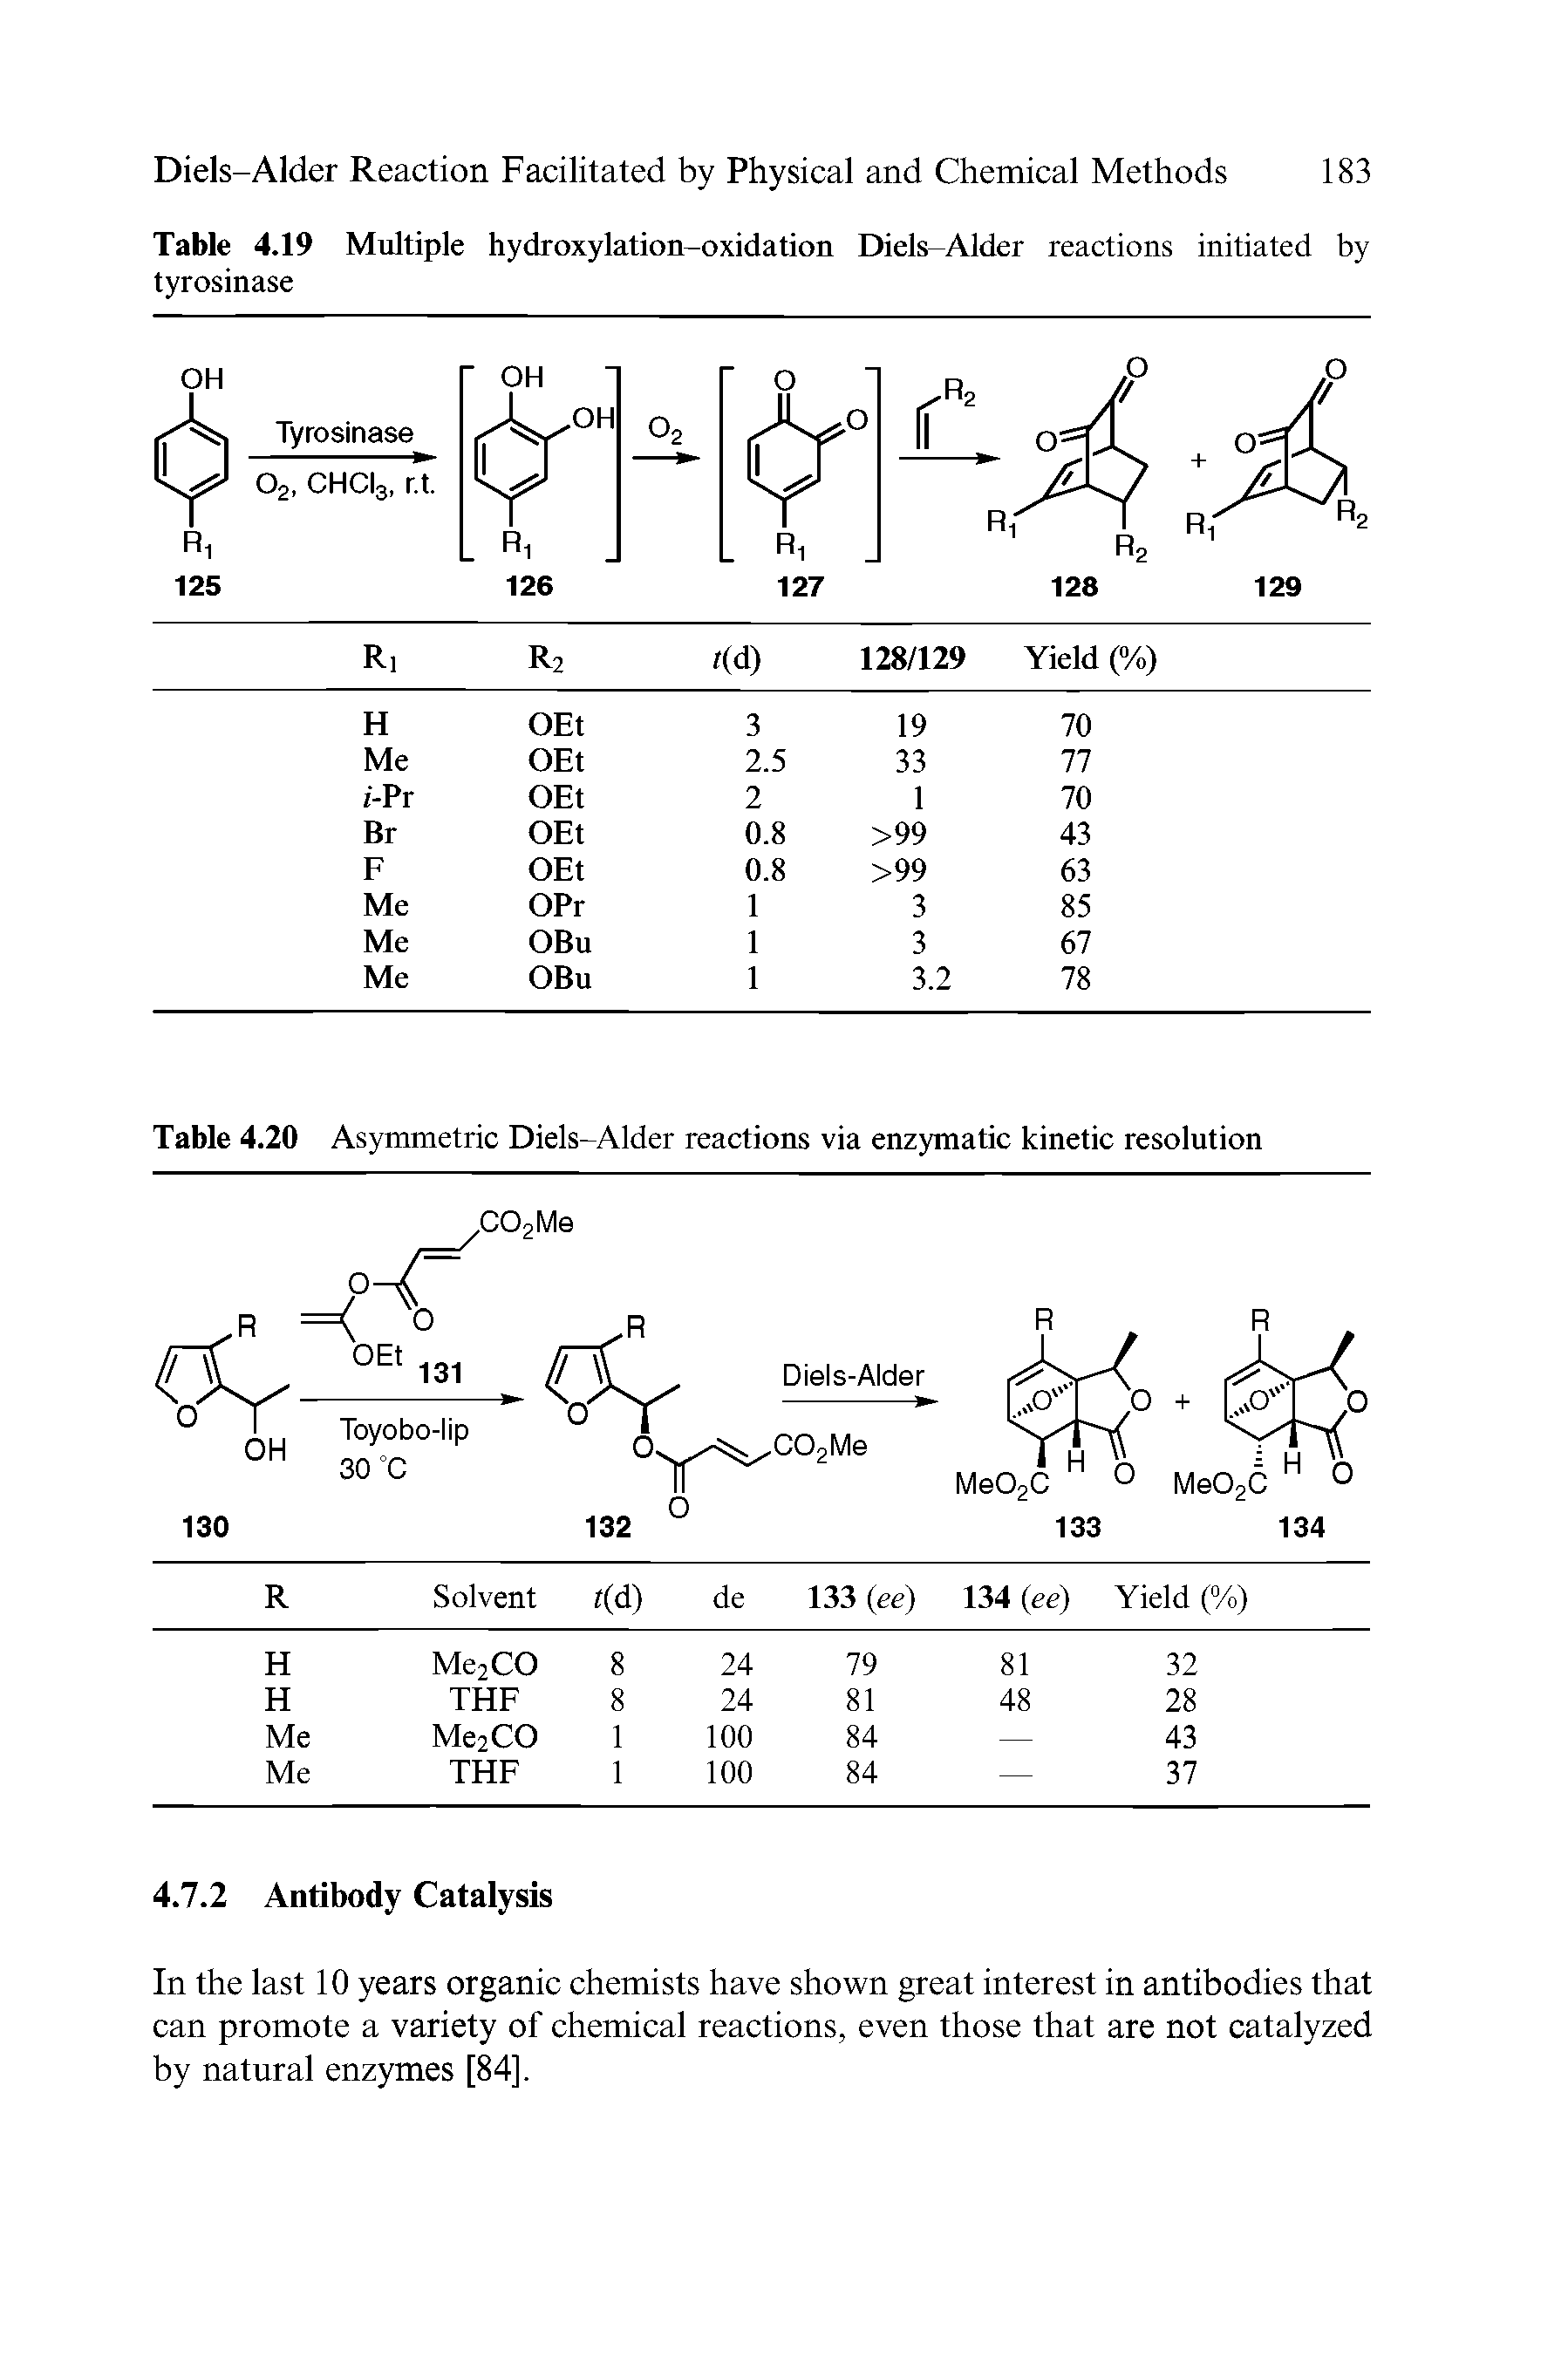 Table 4.19 Multiple hydroxylation-oxidation Diels-Alder reactions initiated by tyrosinase...